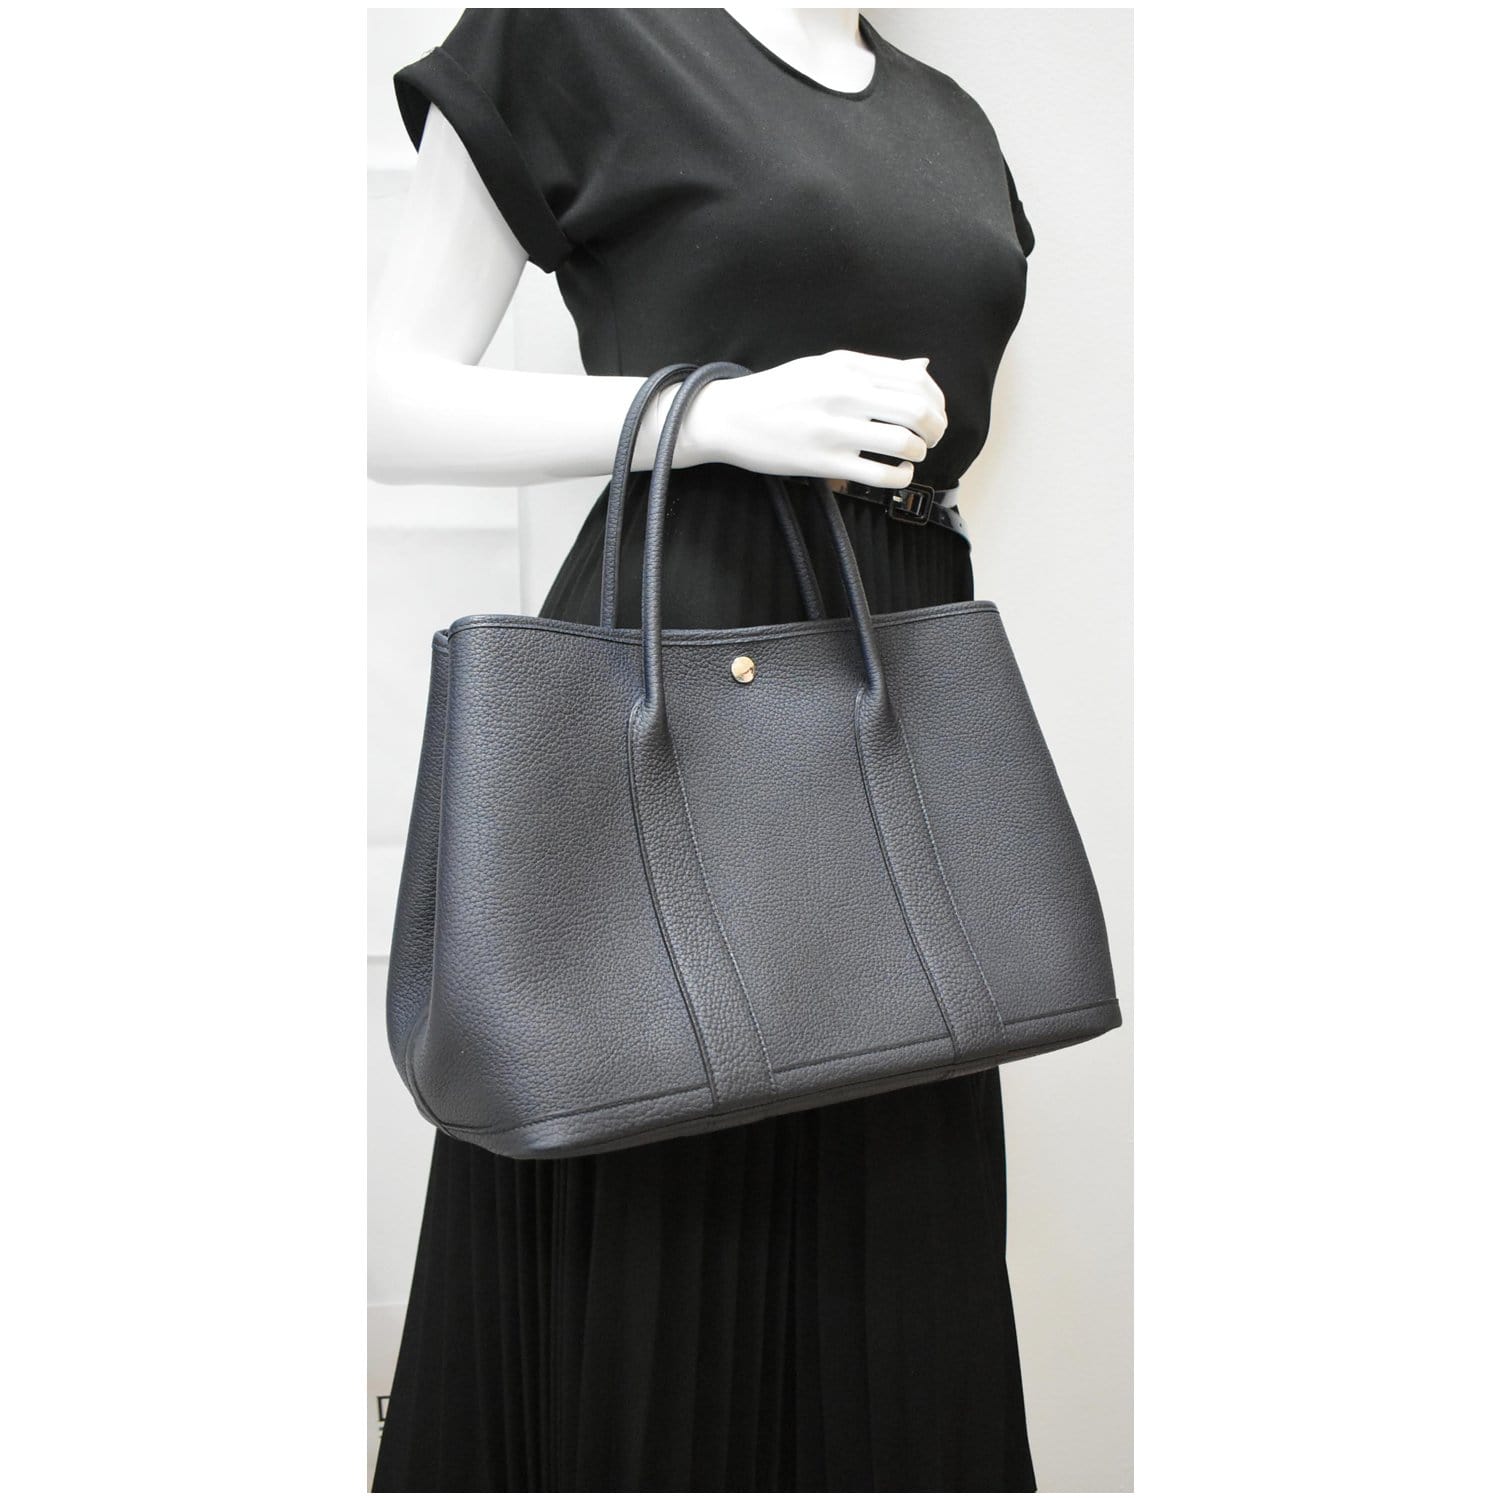 Hermes Garden Party Leather Tote Bag